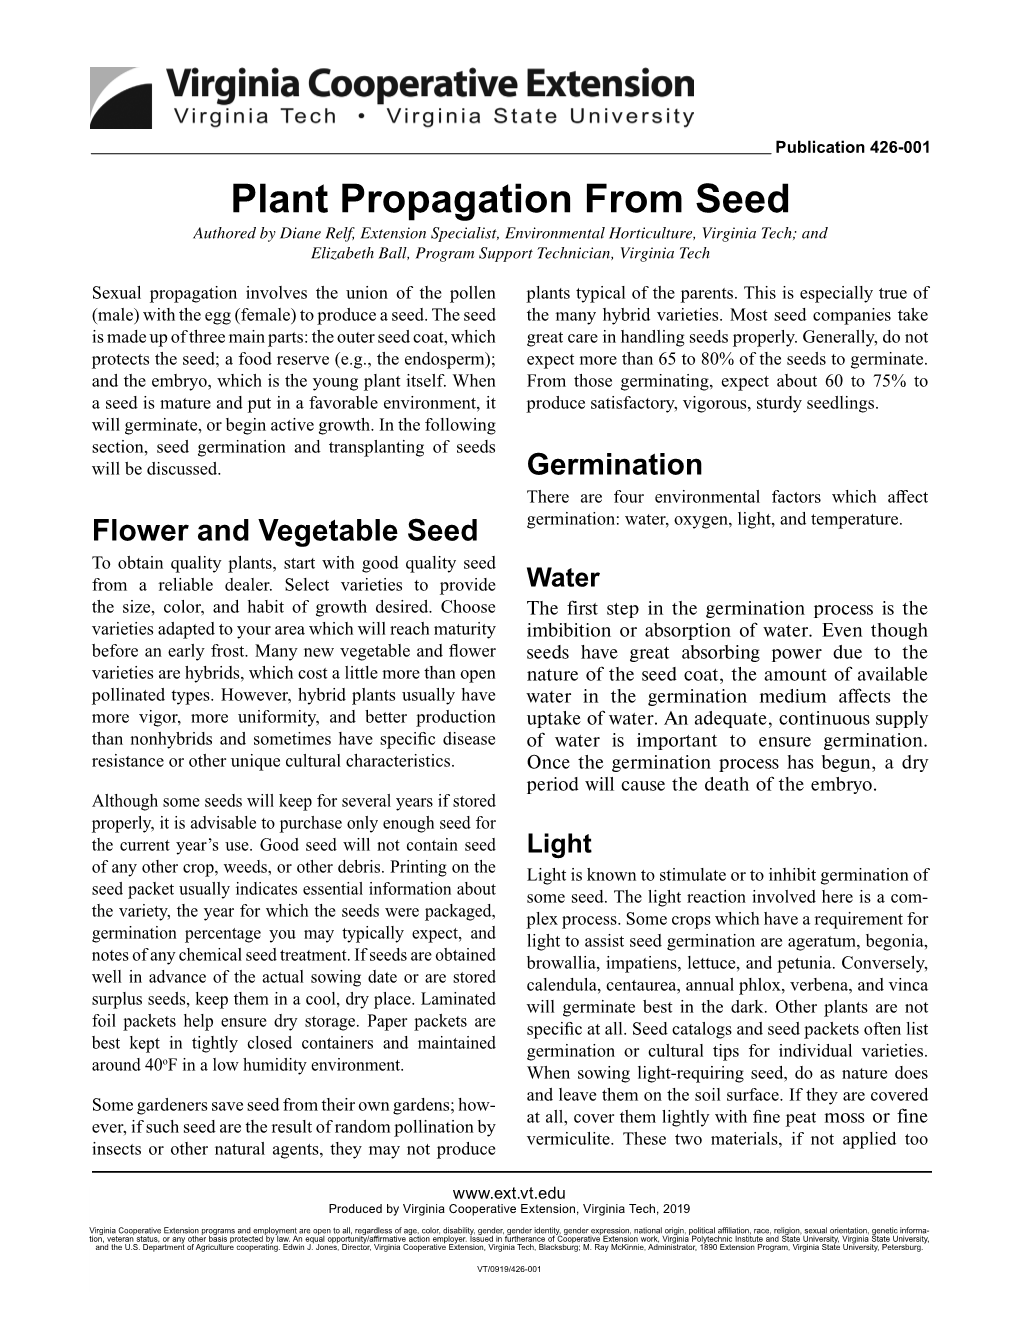 Plant Propagation from Seed